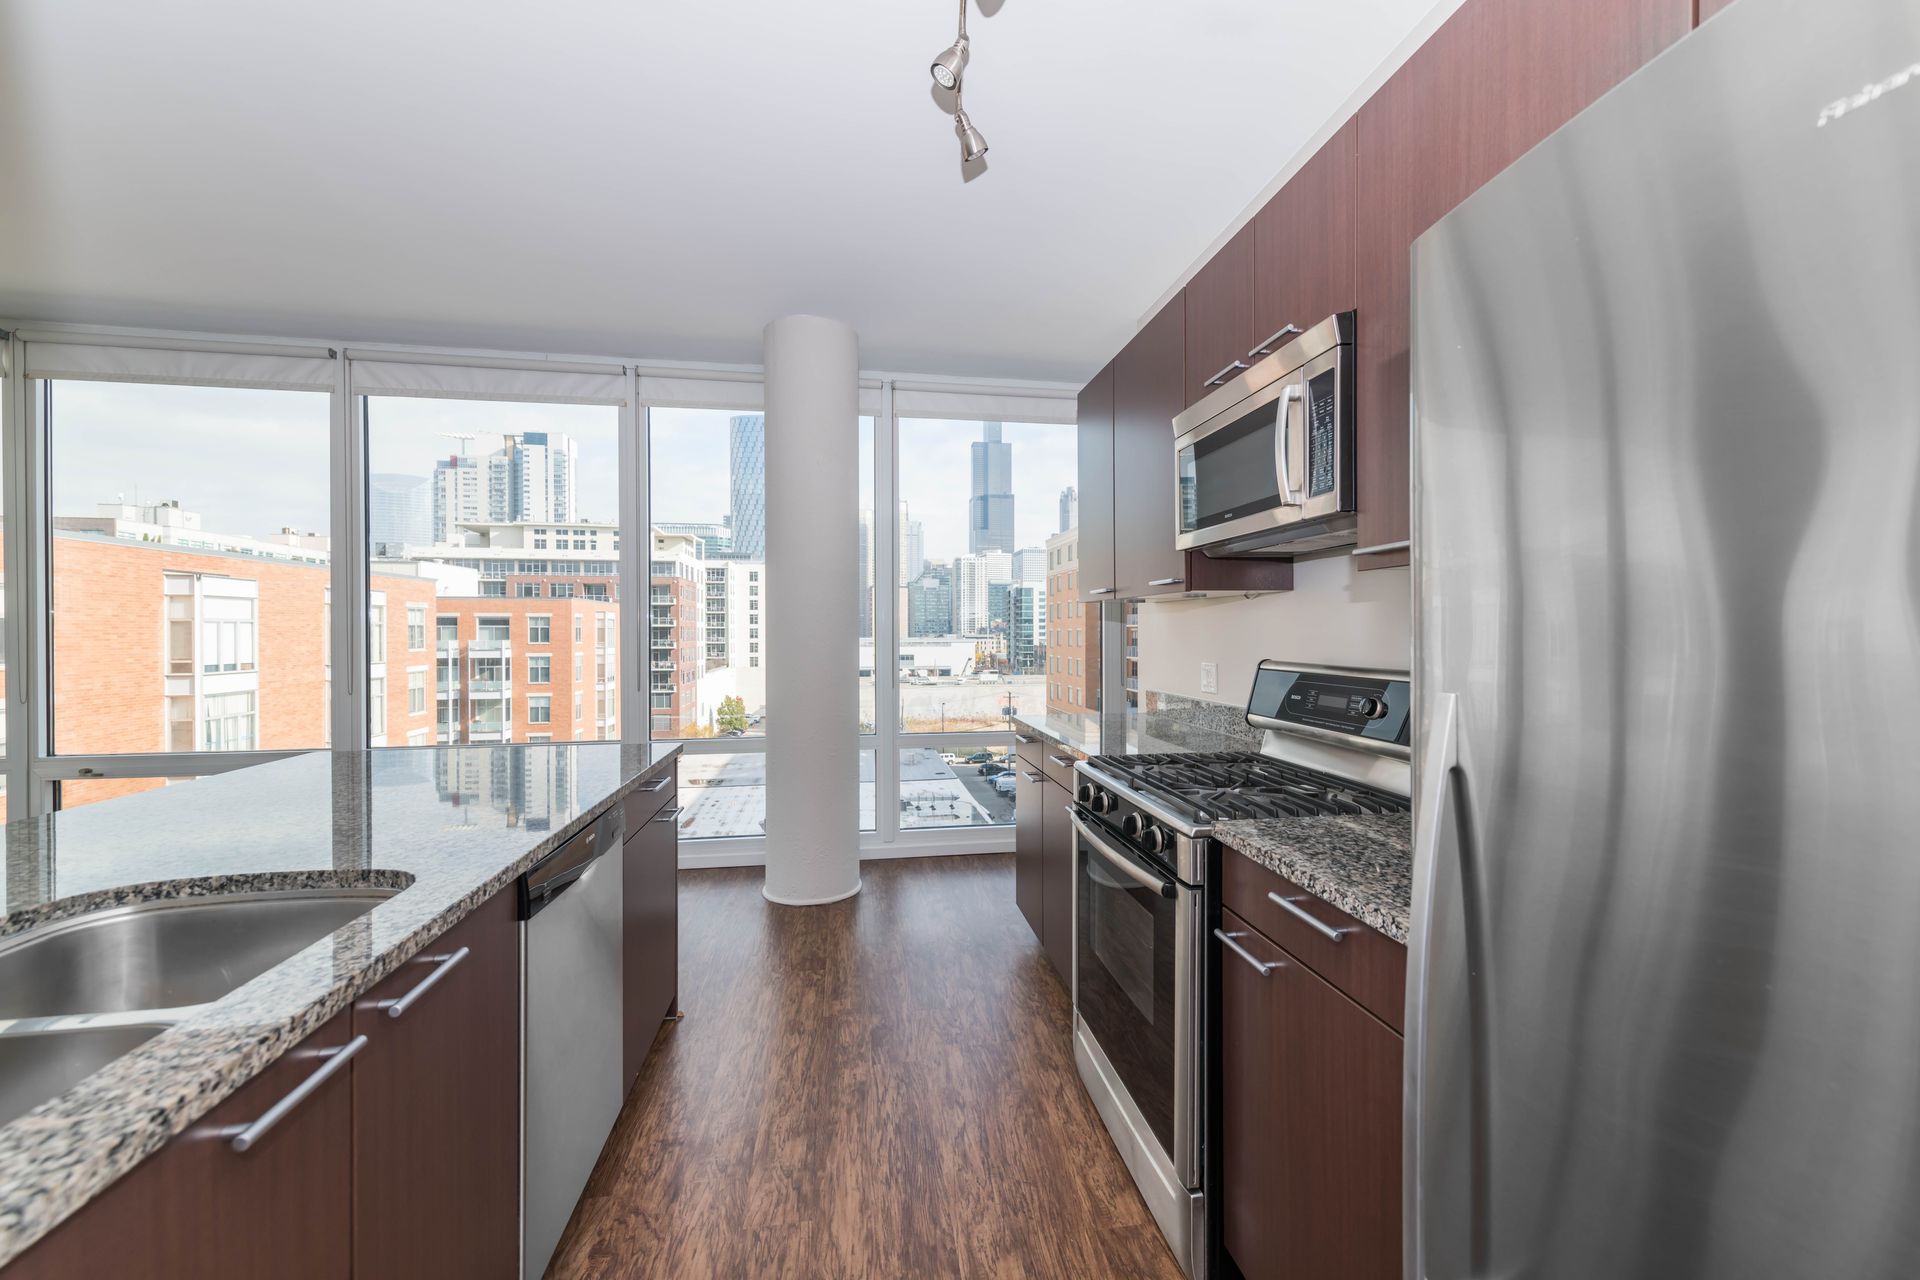 A kitchen with stainless steel appliances and granite counter tops at 24 S Morgan Apartments.